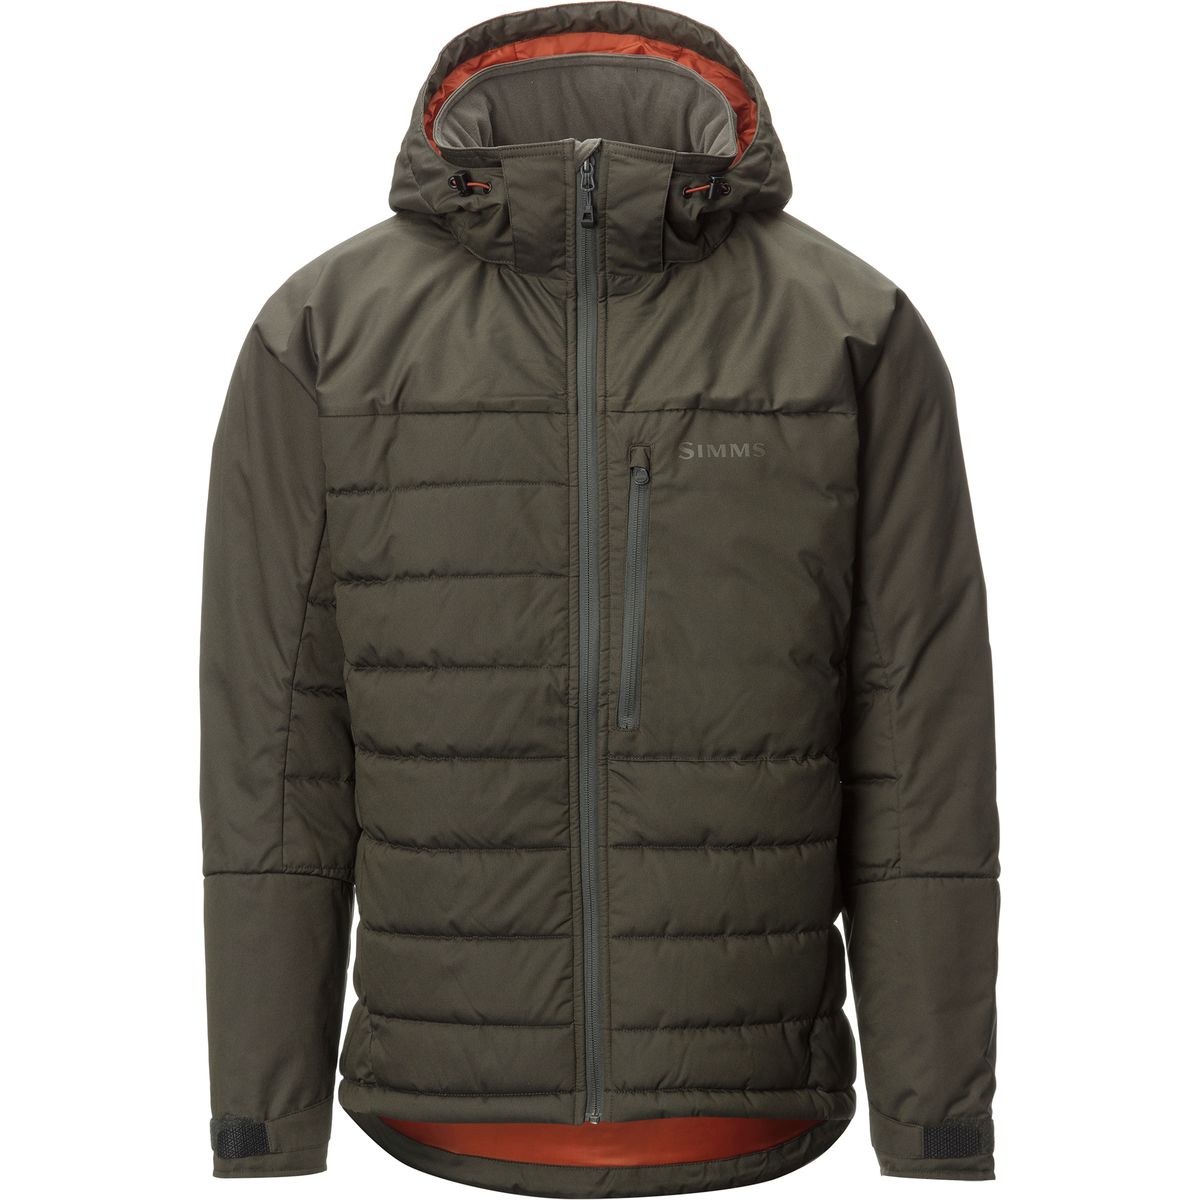 Simms Exstream Insulated Jacket - Men's - Clothing